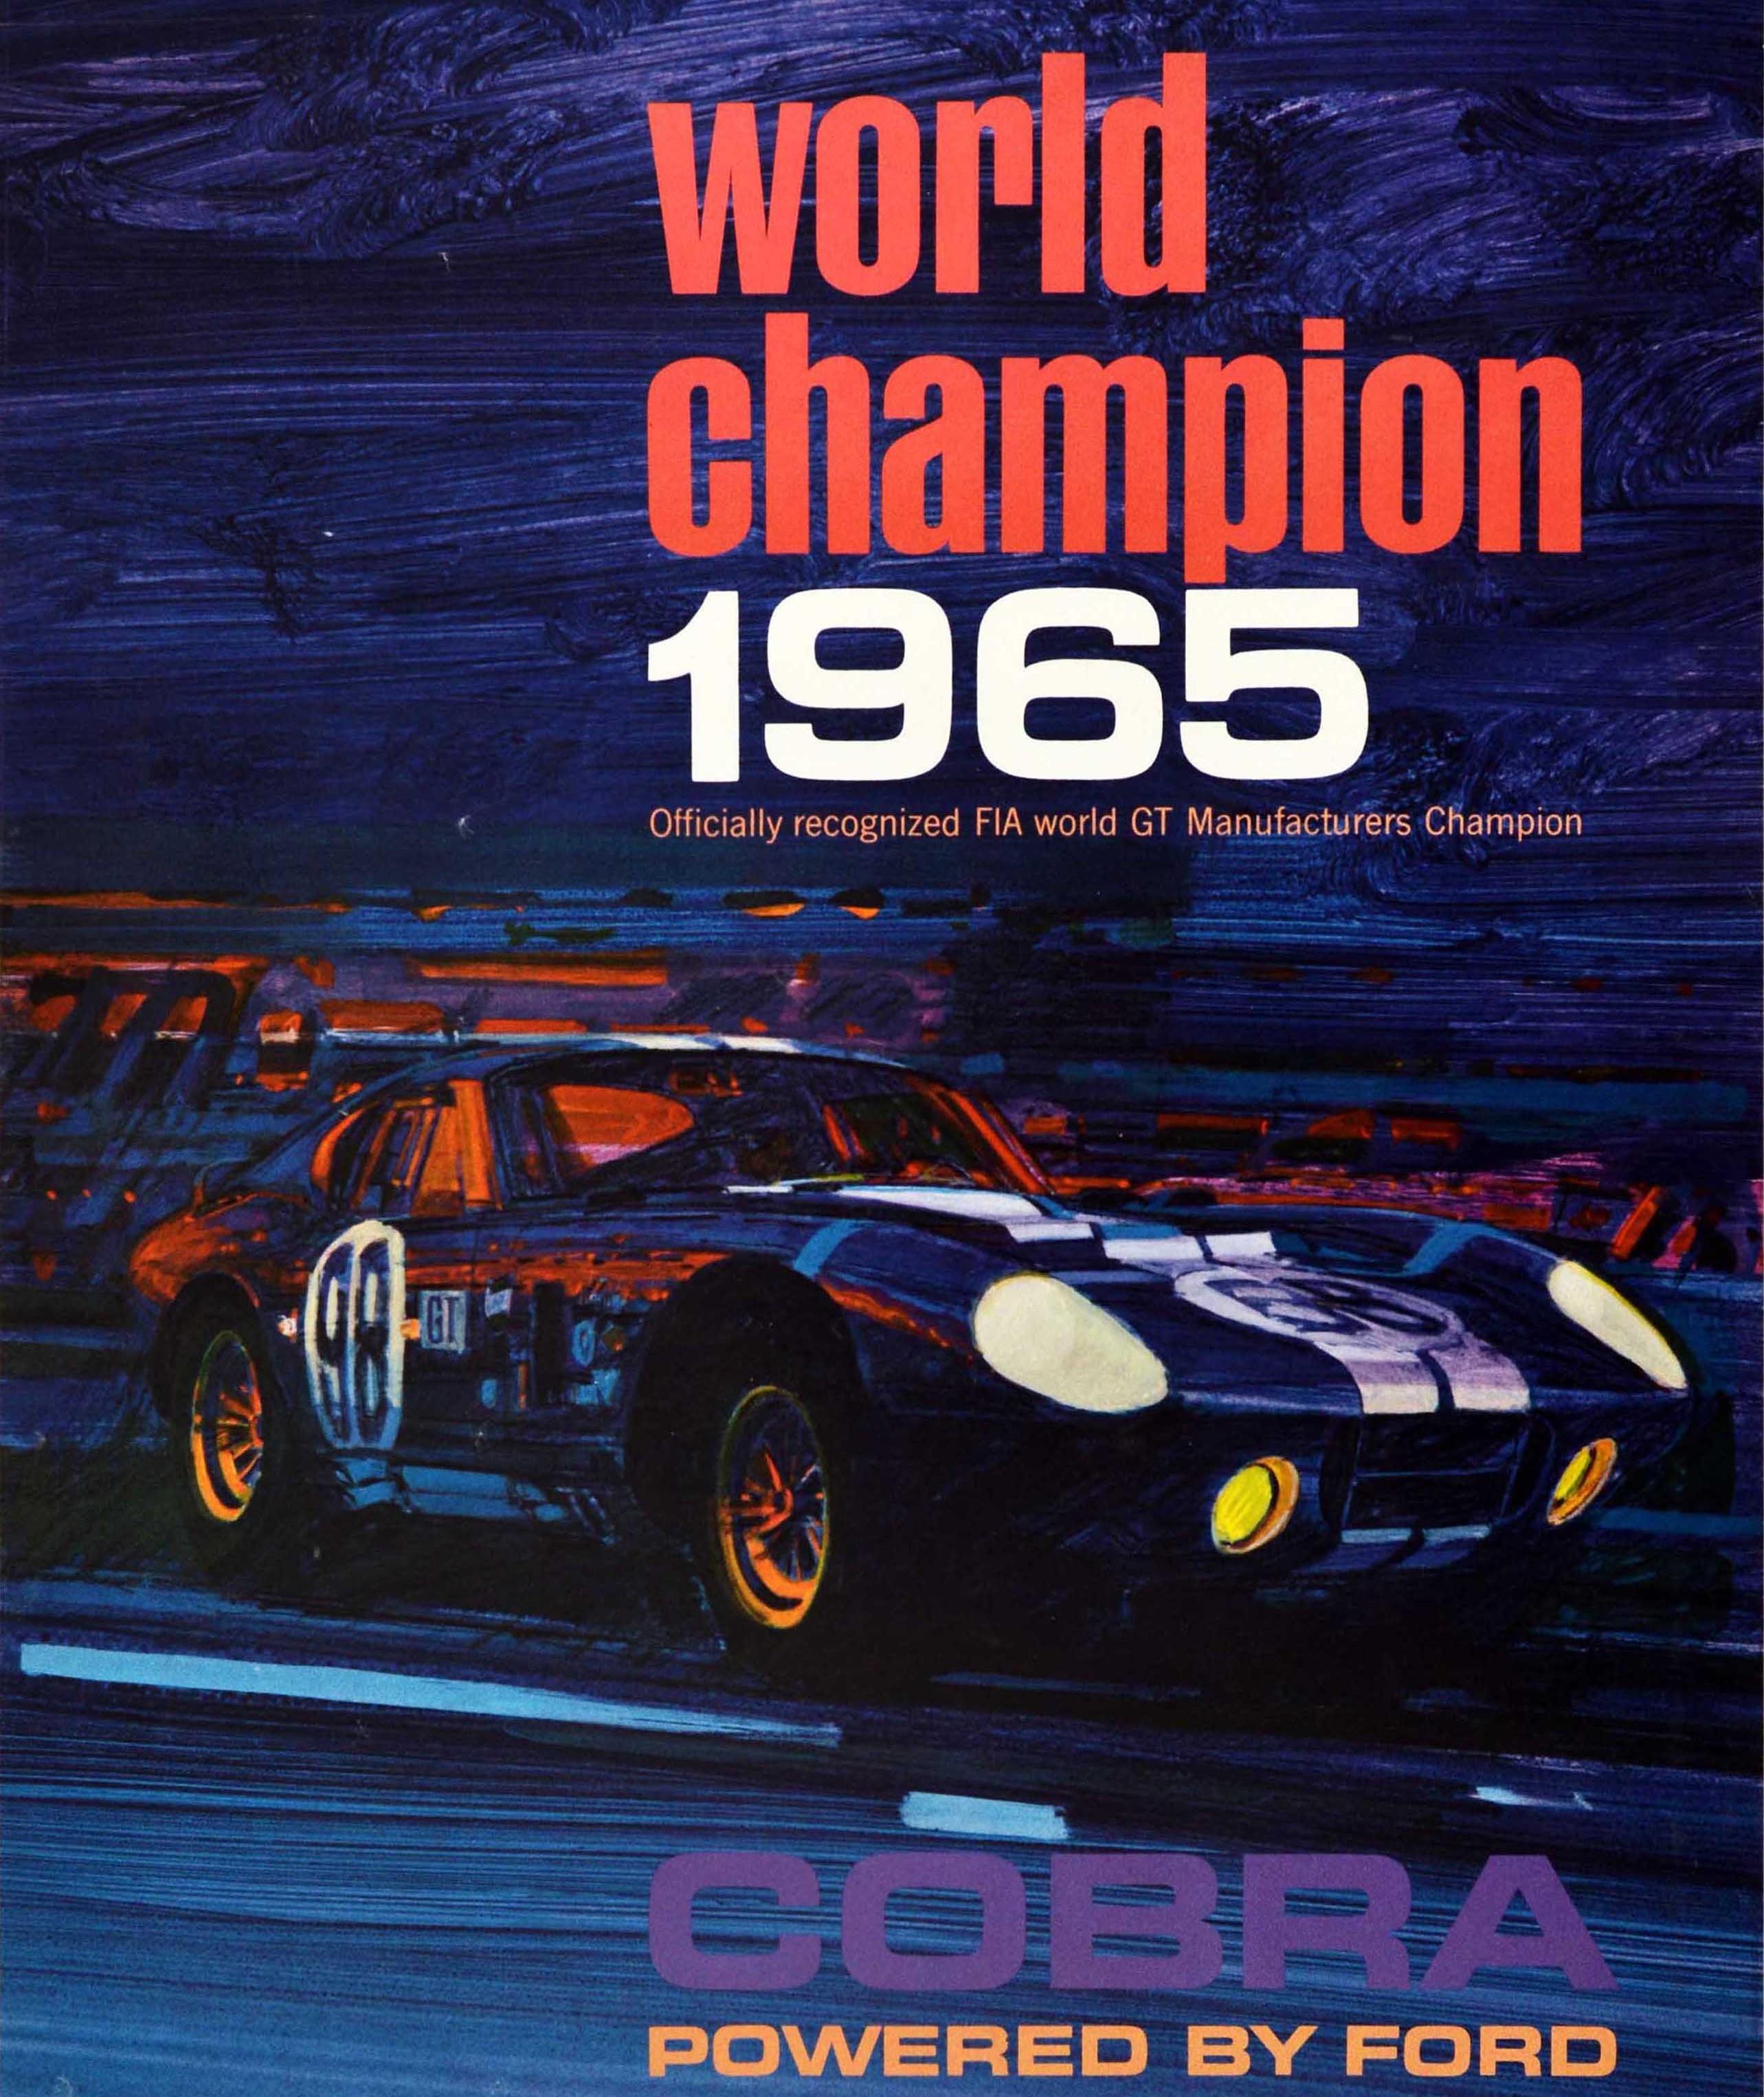 vintage shelby poster